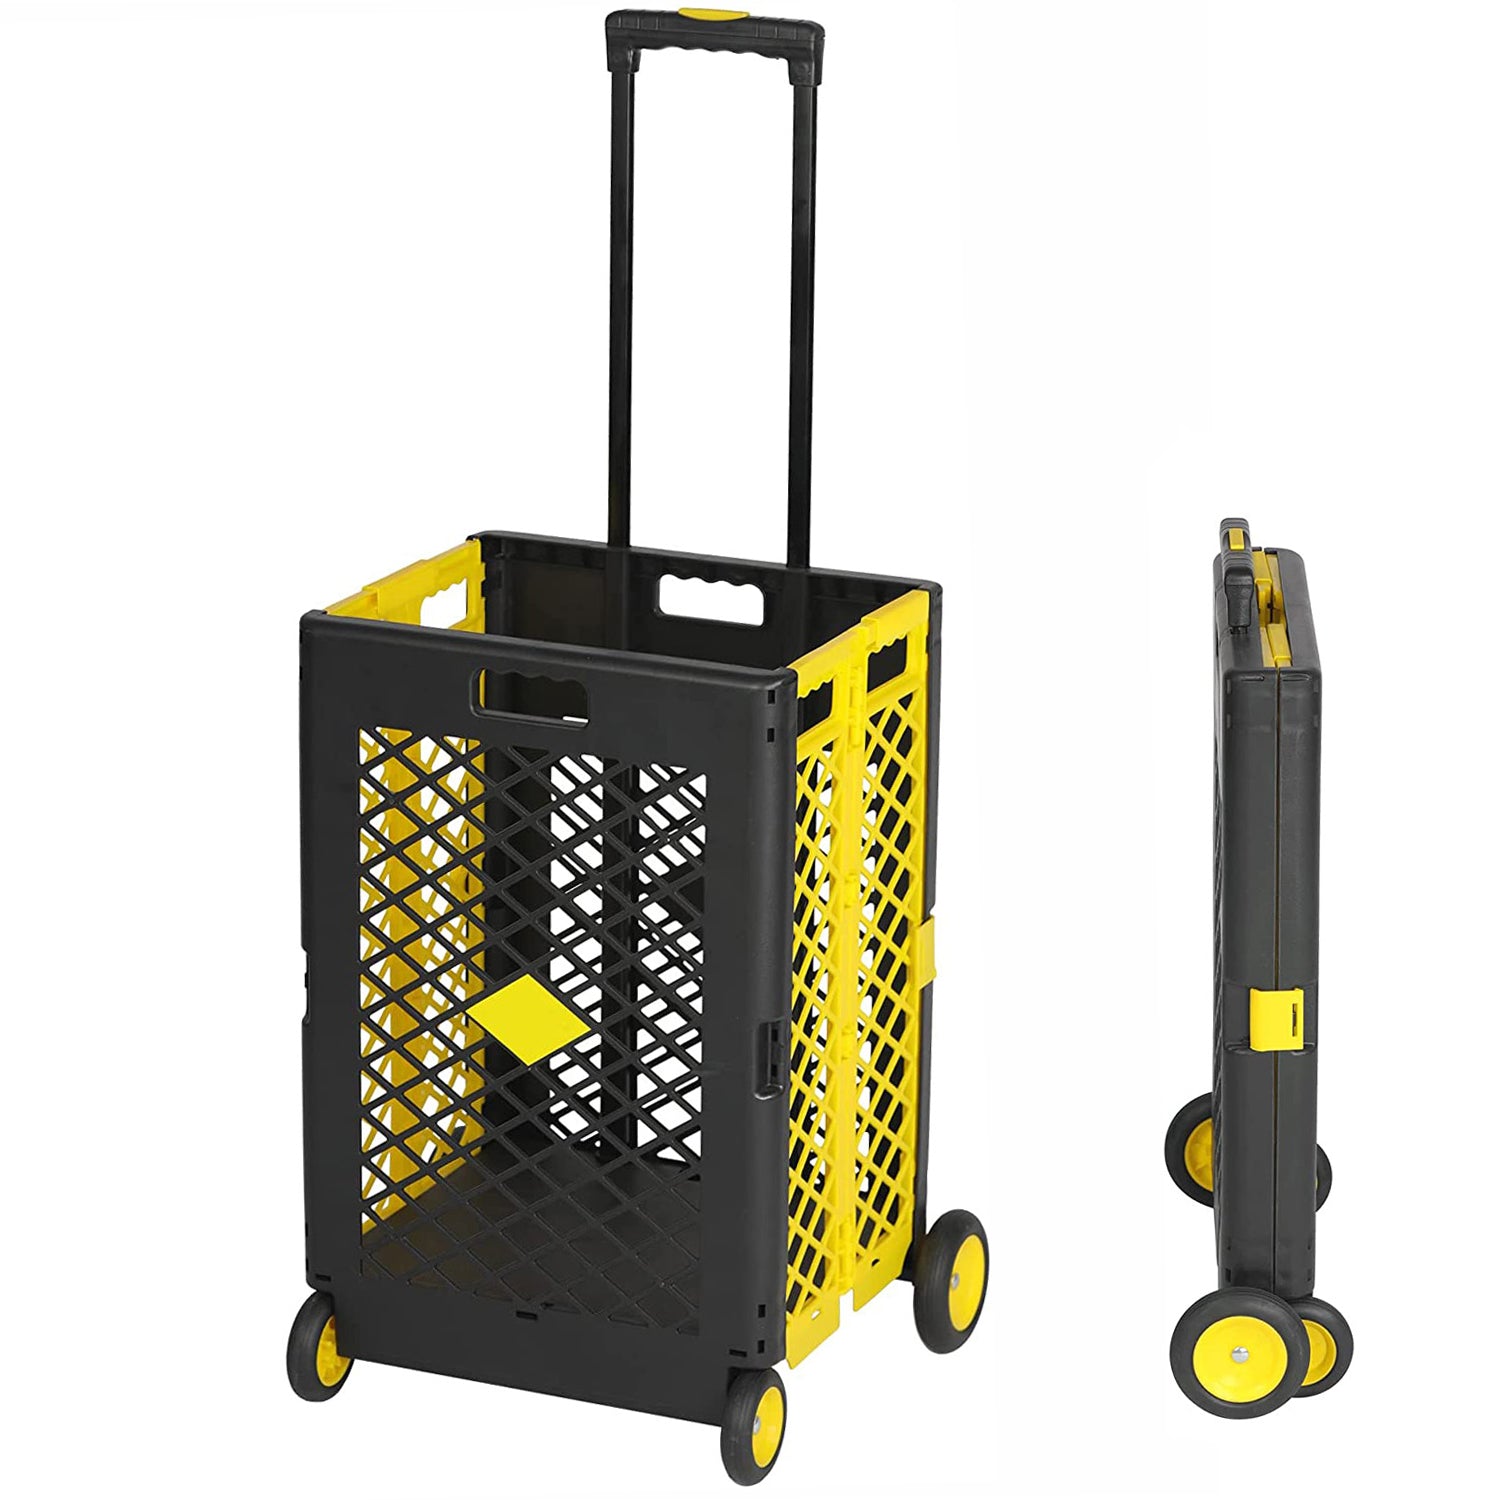 55L Folding Utility Shopping Cart with Wheels Telescopic Handle Collapsible Rolling Crate, Yellow